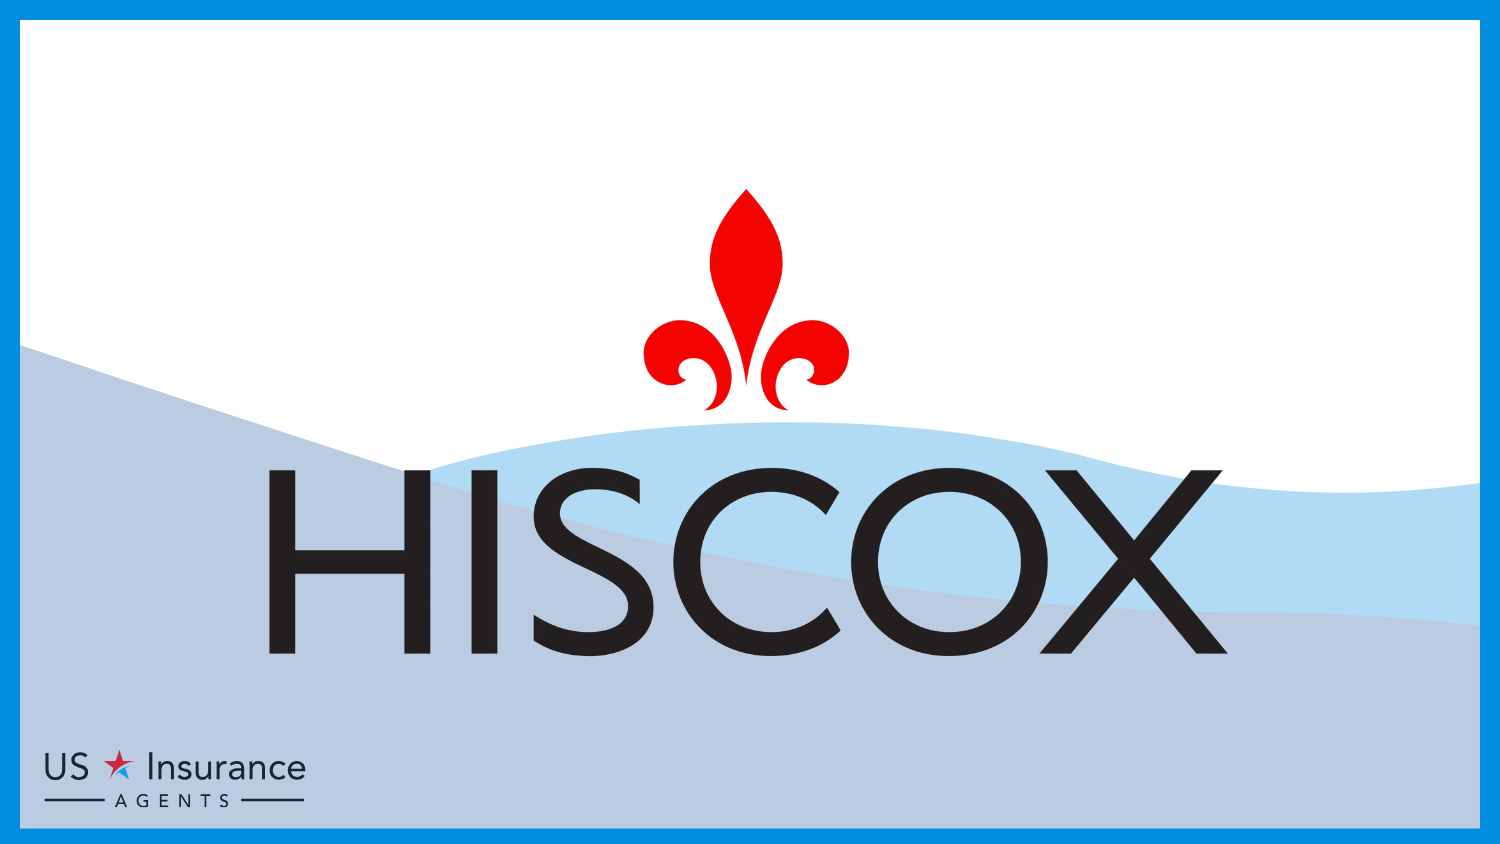 Hiscox: Best Business Insurance for LLCs